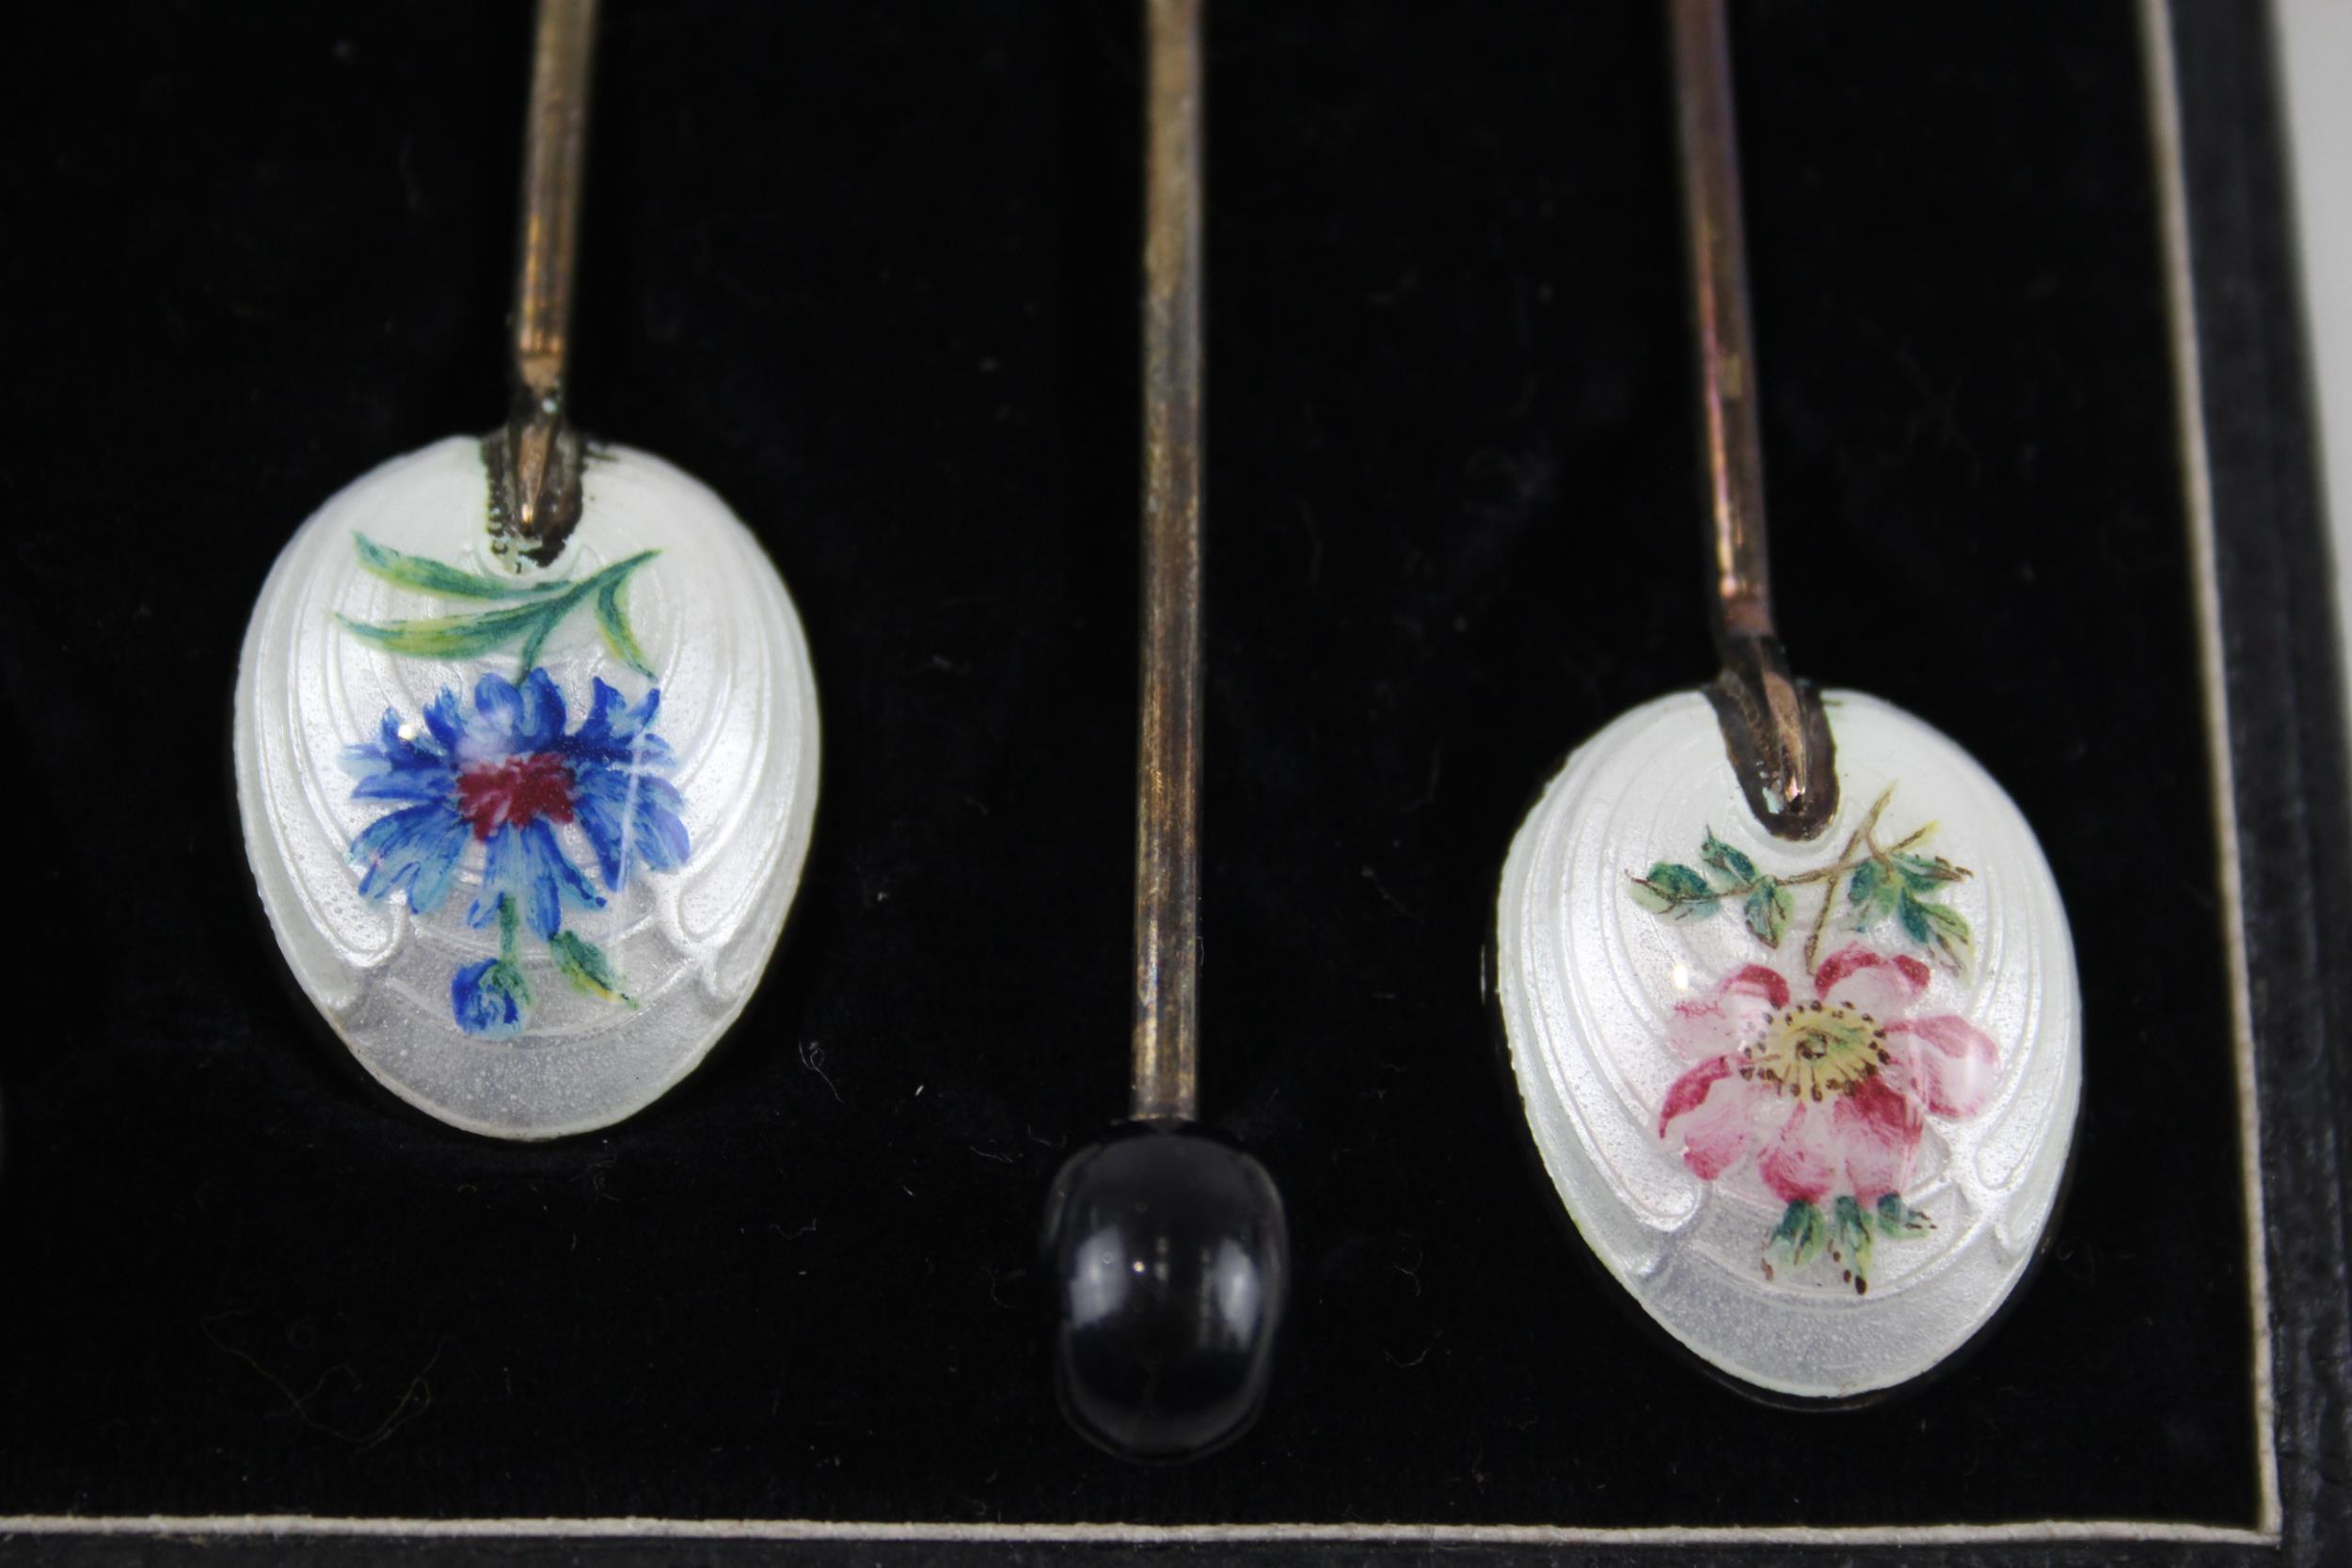 6 x Vintage 1954 Birmingham Sterling Silver Guilloche Enamel Coffee Spoons (45g) - w/ Fitted Case, - Image 4 of 6